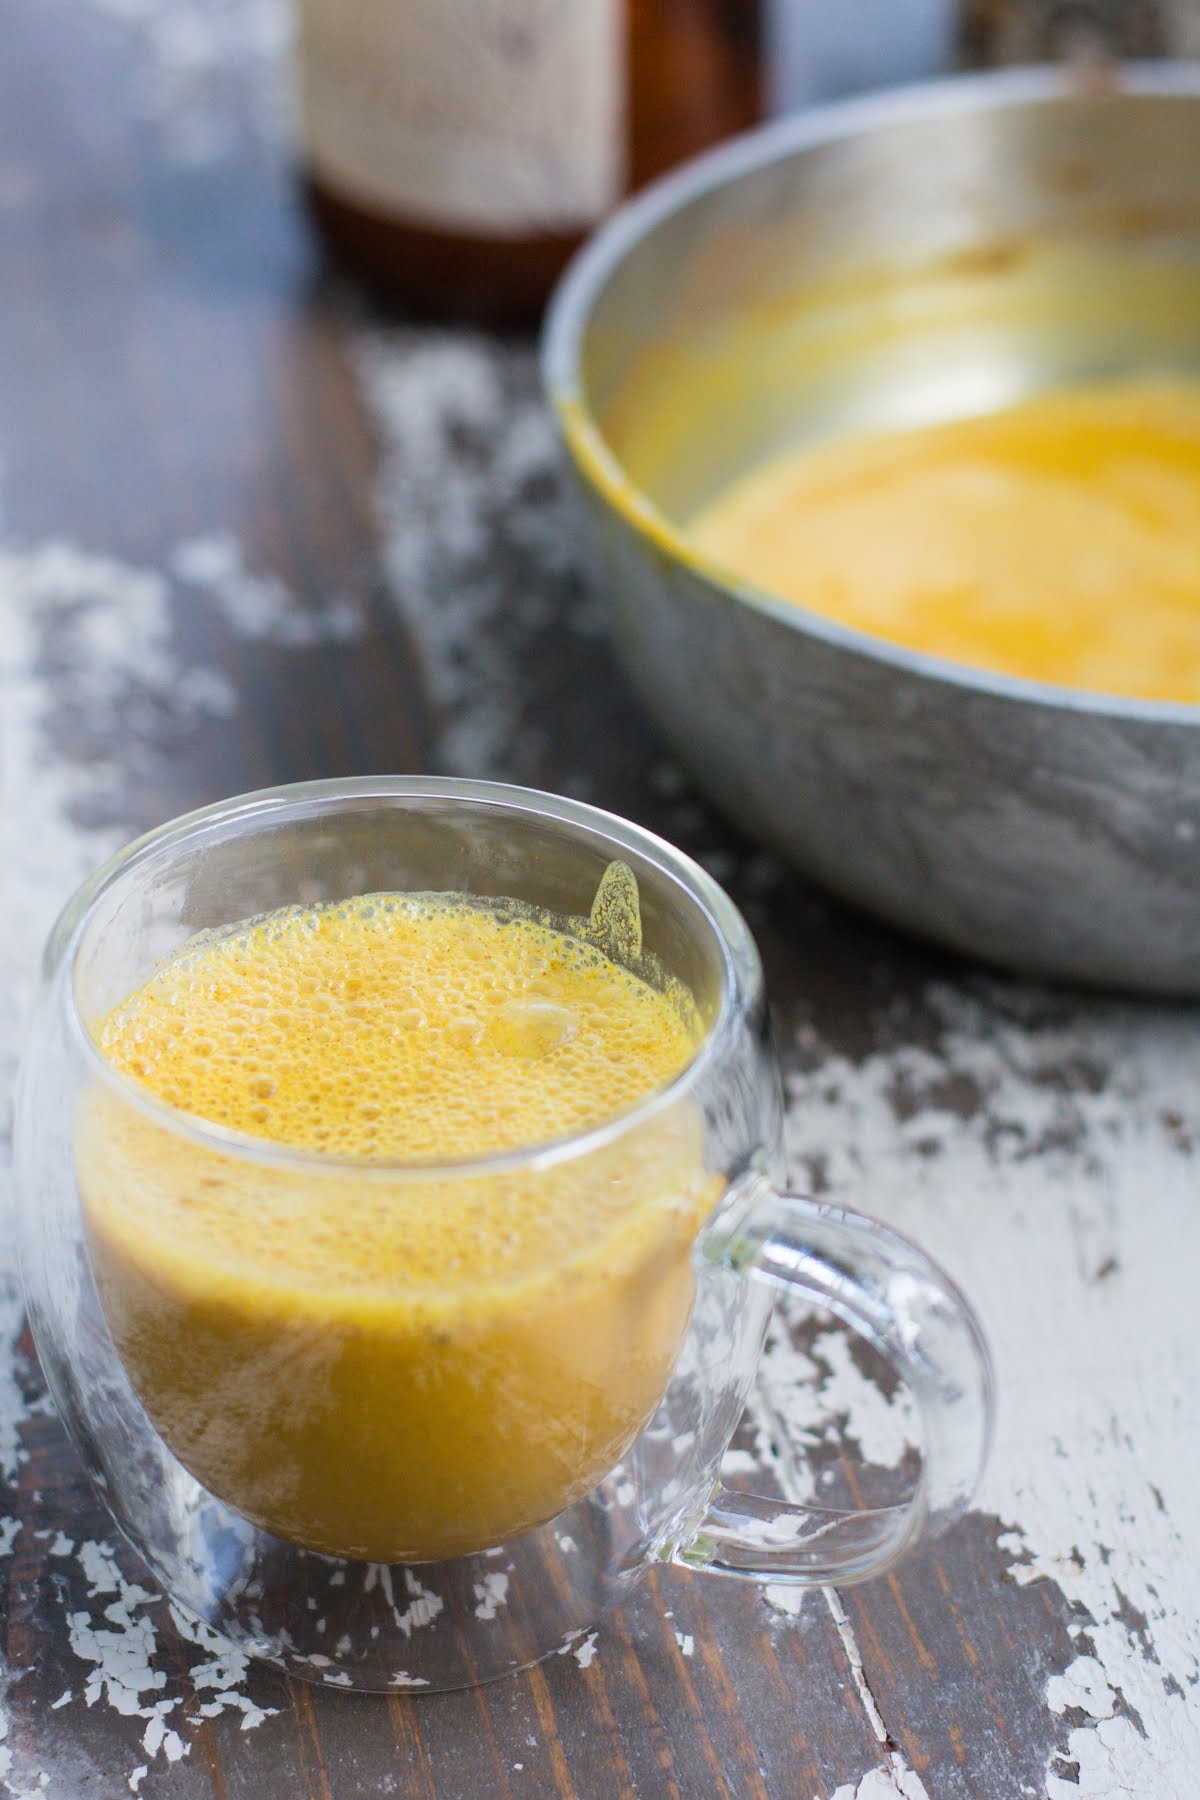 Turmeric milk with maca powder and spices.